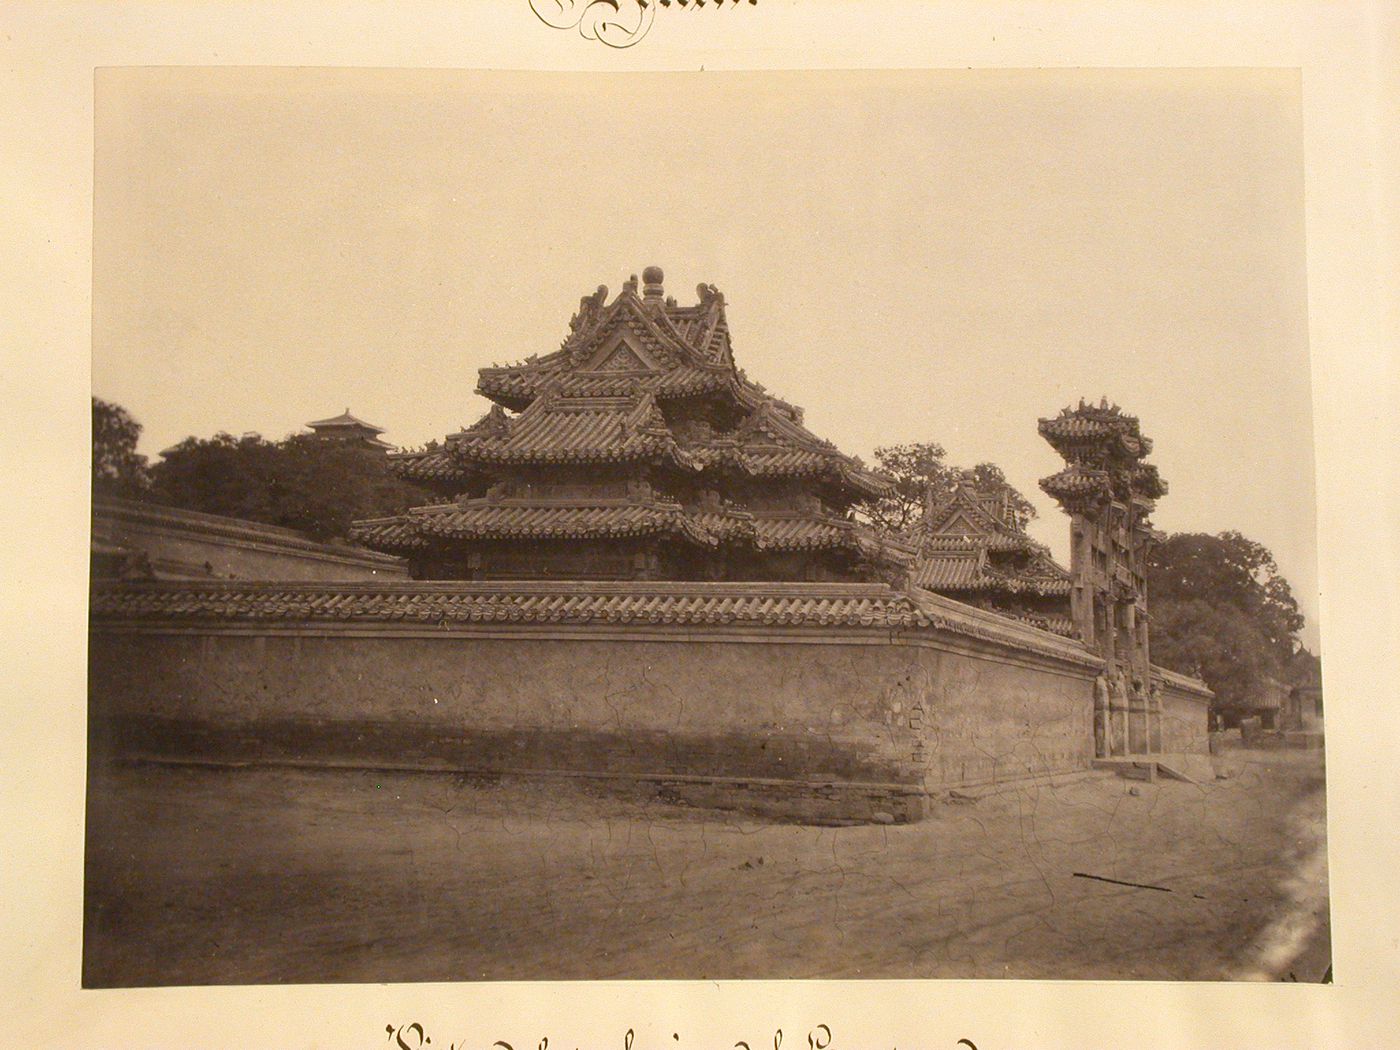 View of an entrance to the Emperor's palace, Peking (now Beijing), China